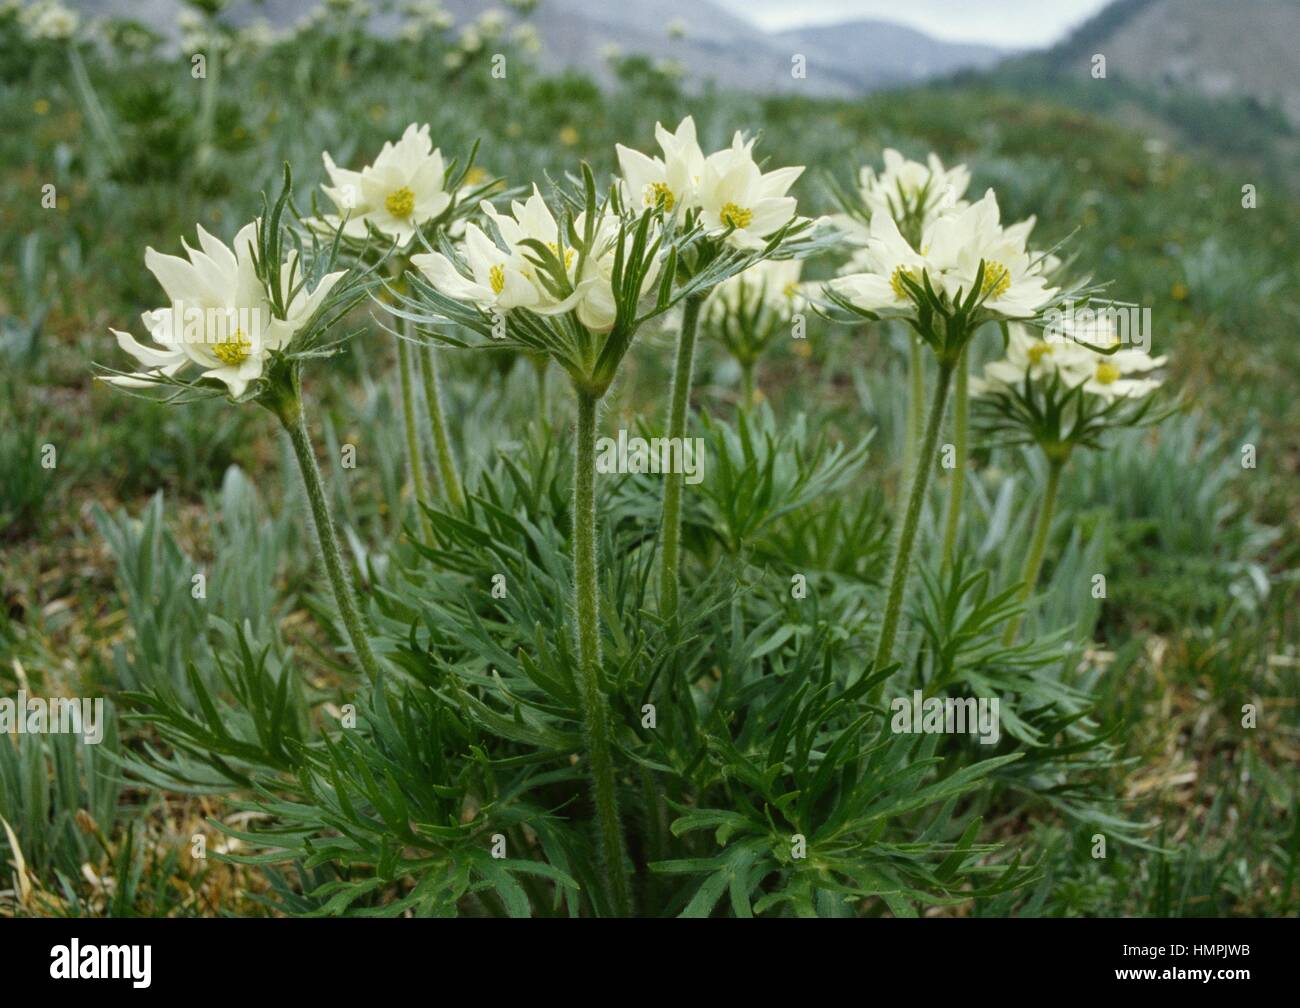 Narcissus-flowered anemone (Anemone narcissiflora), Ranunculaceae, Queyras National Park, France. Stock Photo